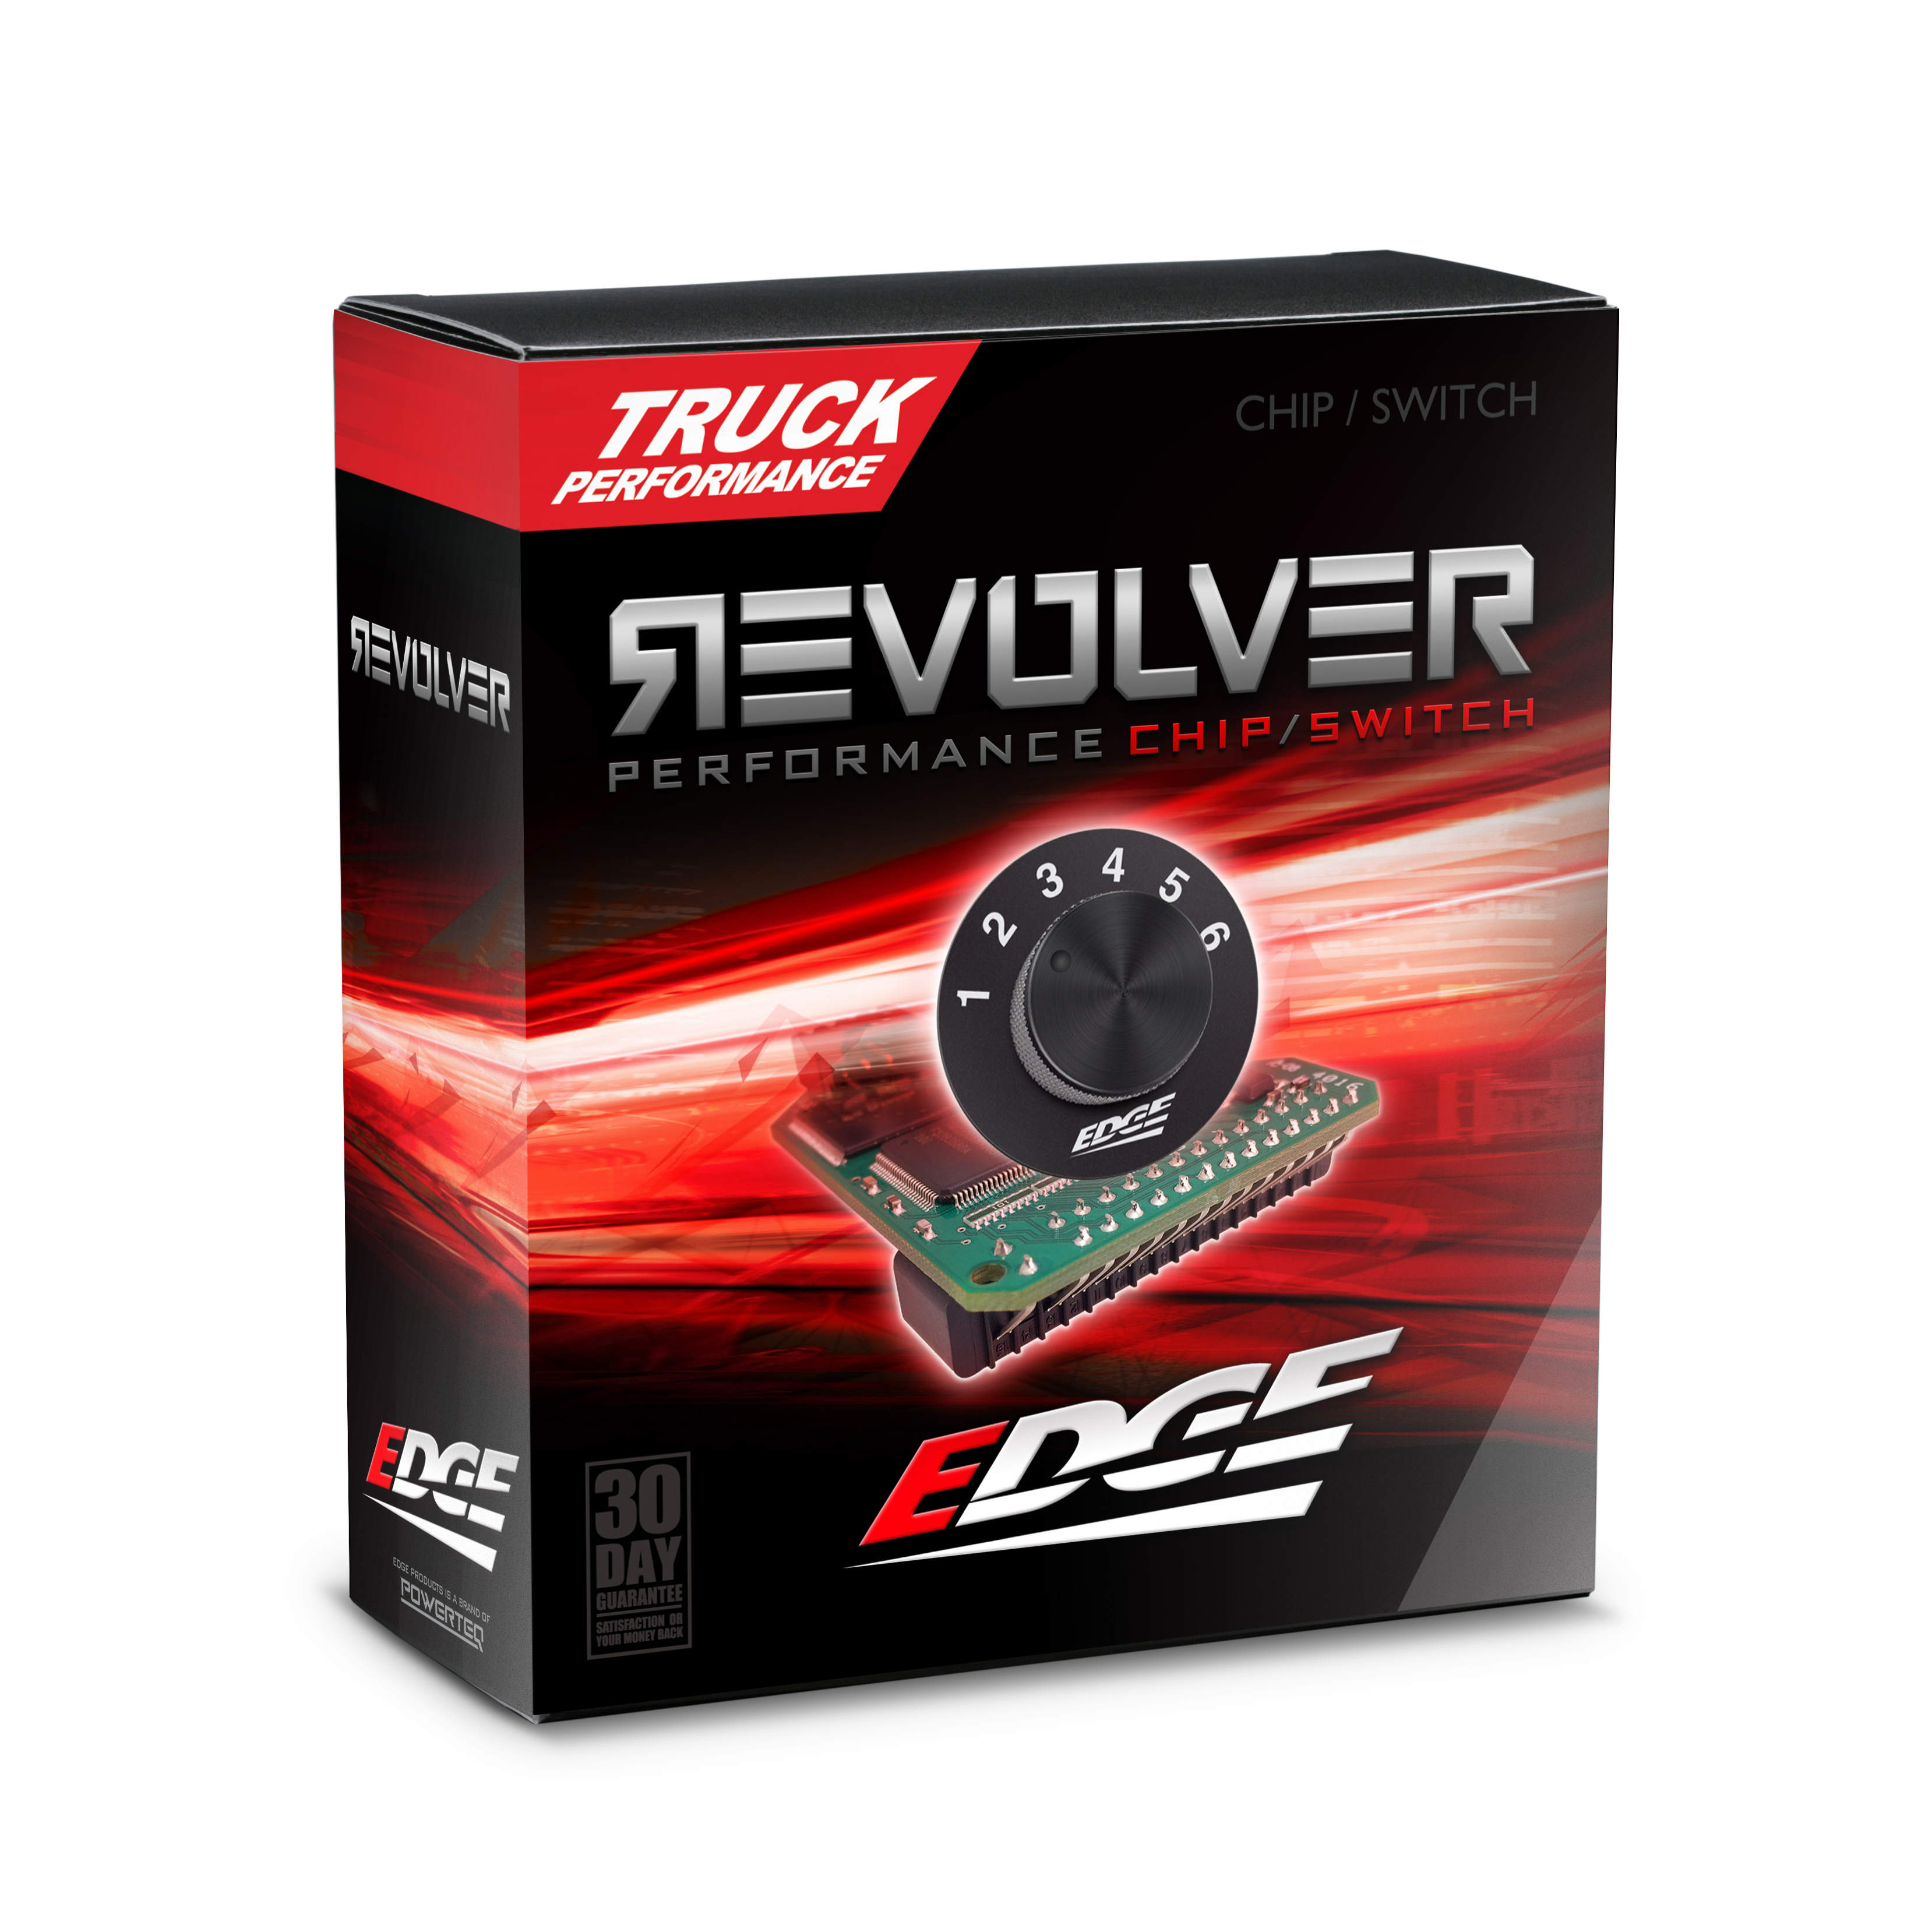 REVOLVER PERFORMANCE CHIP/SWITCH FORD 7.3L 2000 Manual 6-Chip Master Box Code DAC3